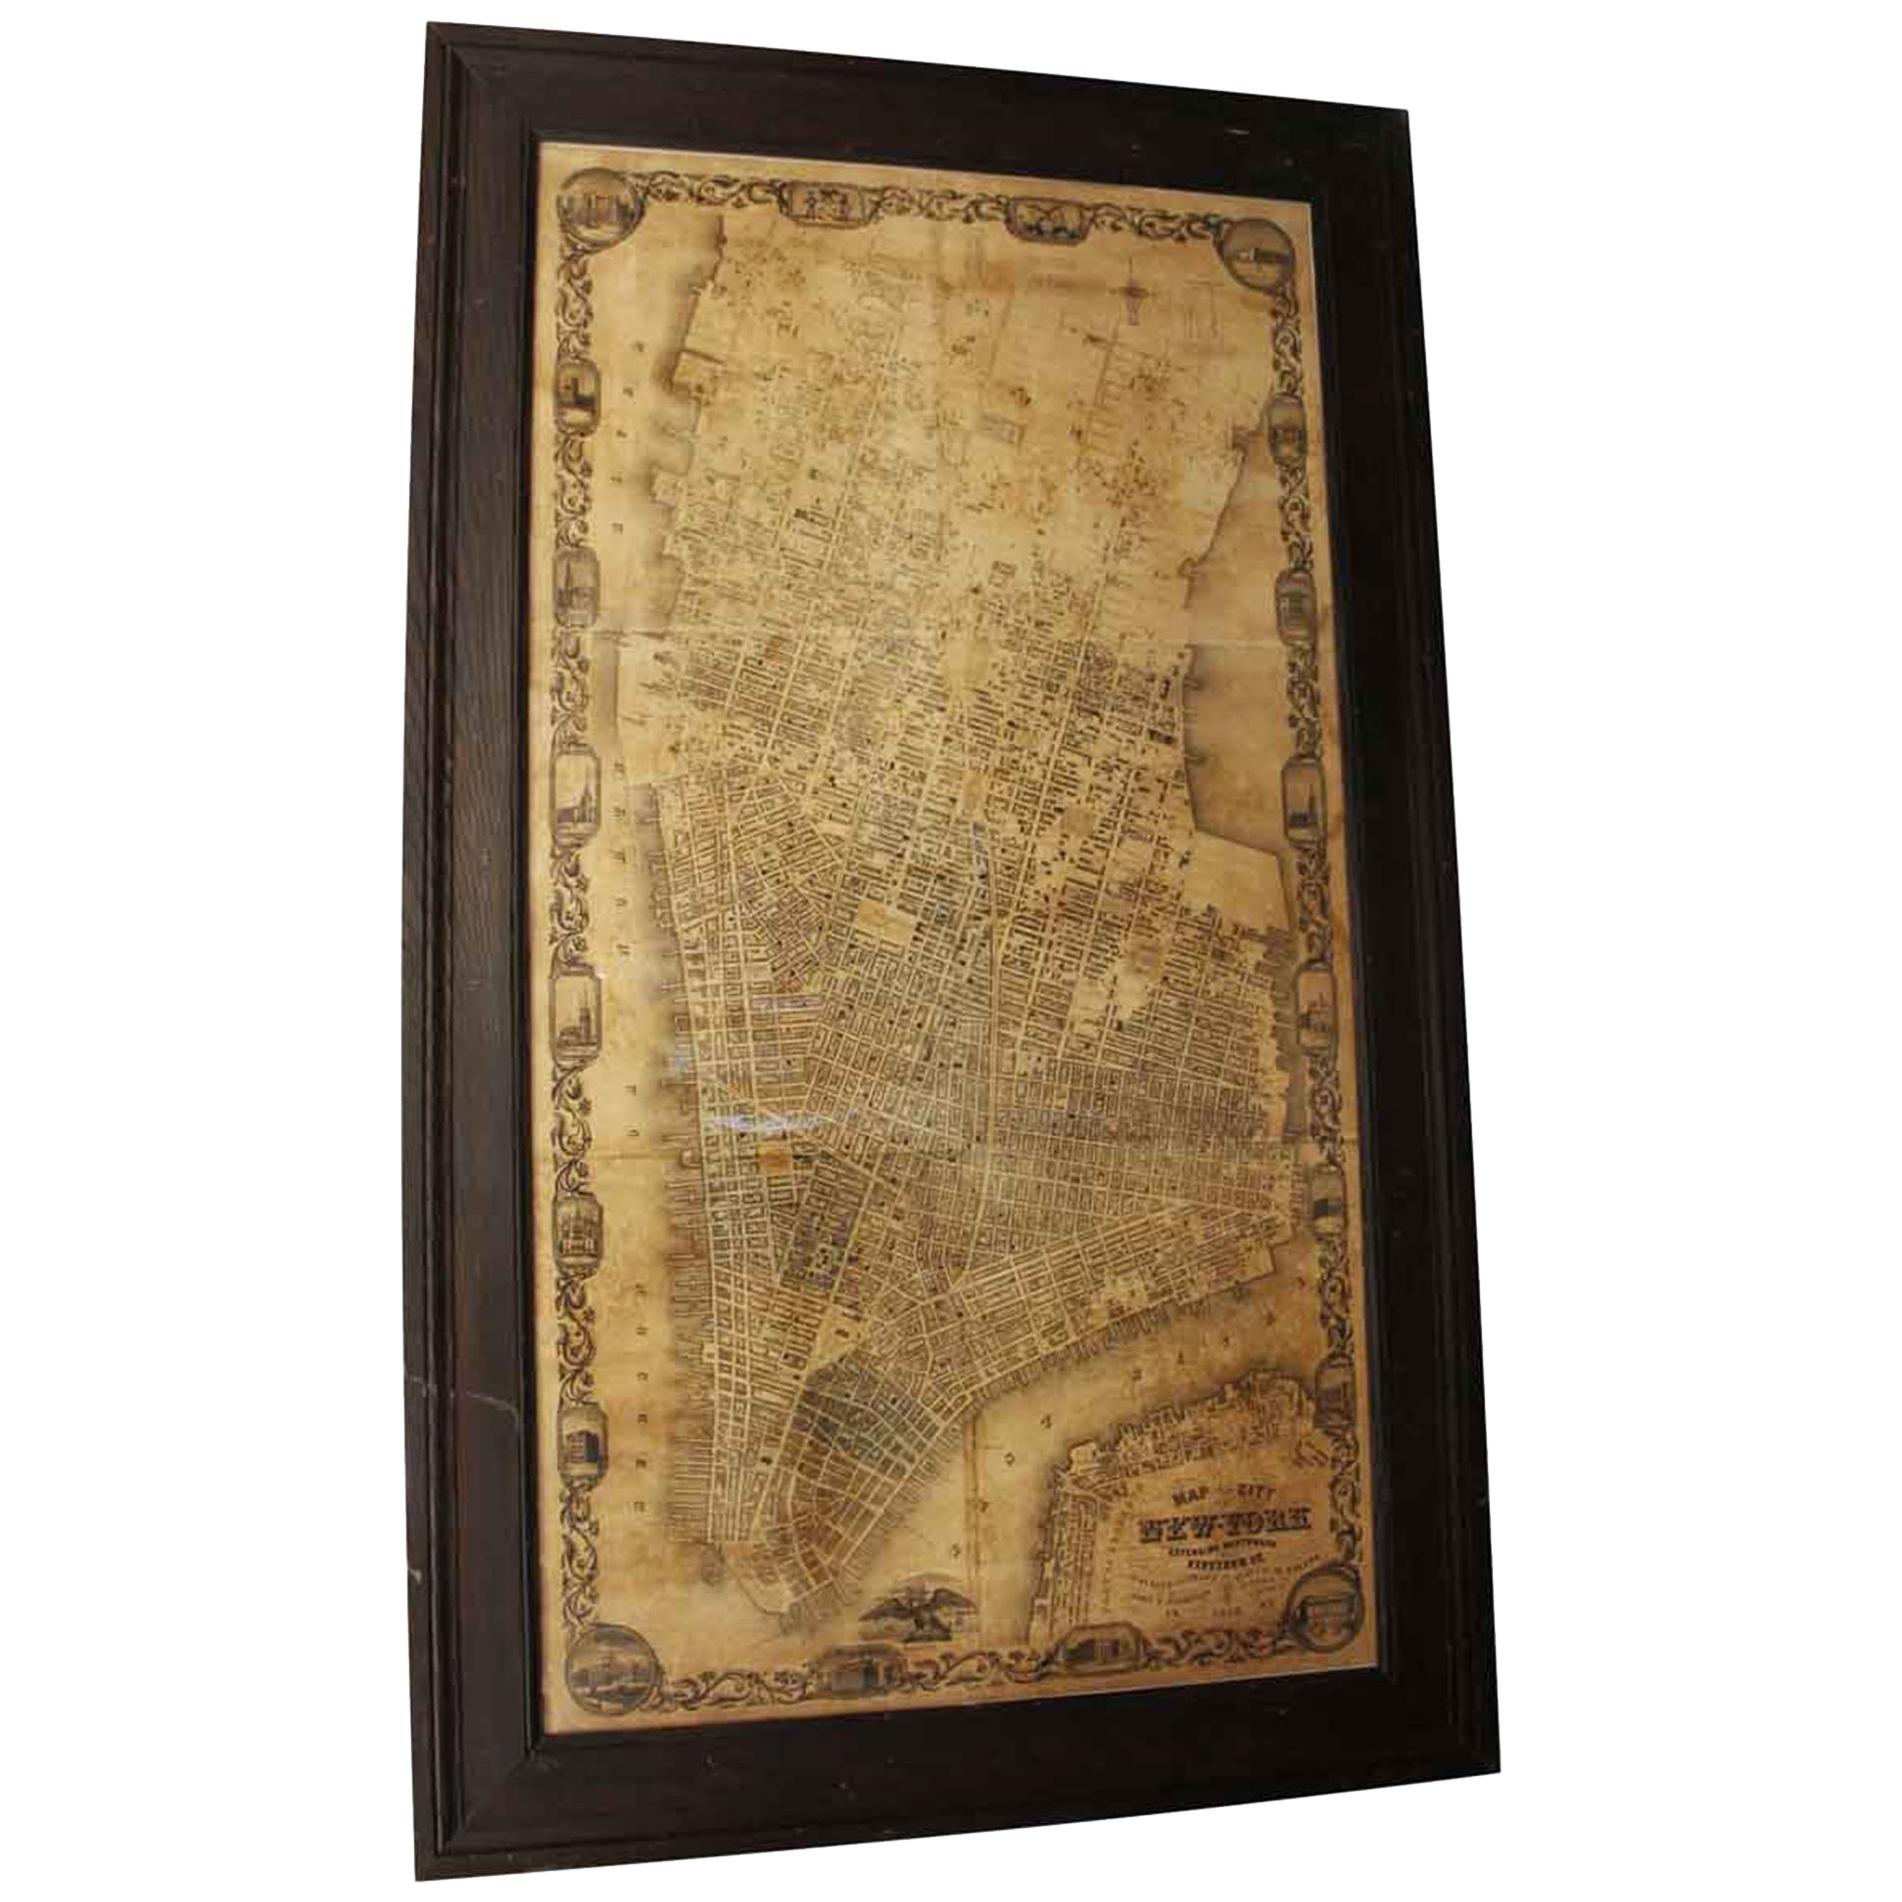 Framed Replica Map of 1852 City of New York in a Wood Frame